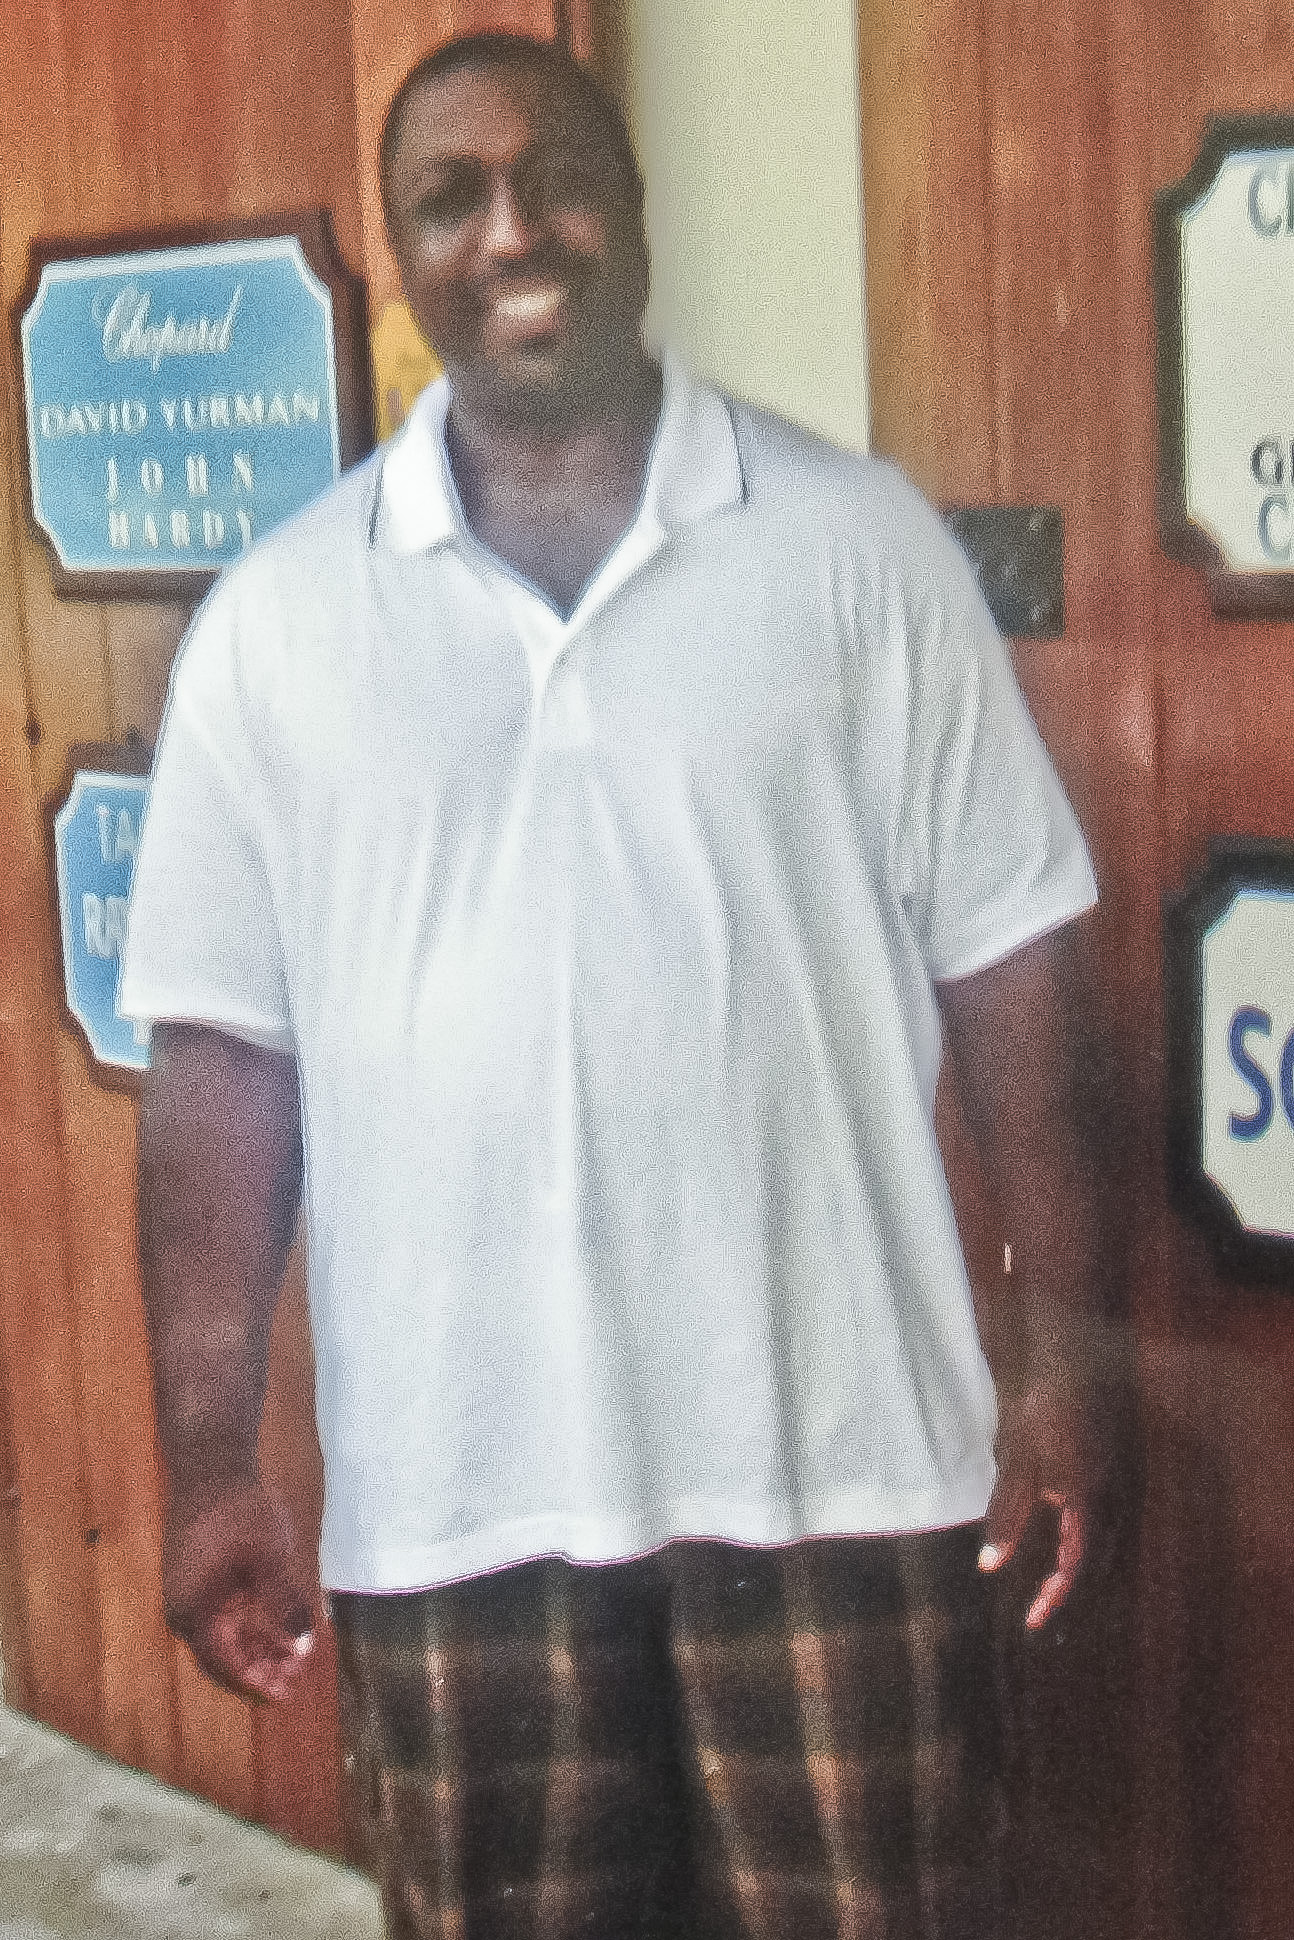 PHOTO: Eric Garner is shown in this undated family photo provided by the National Action Network, Saturday, July 19, 2014.